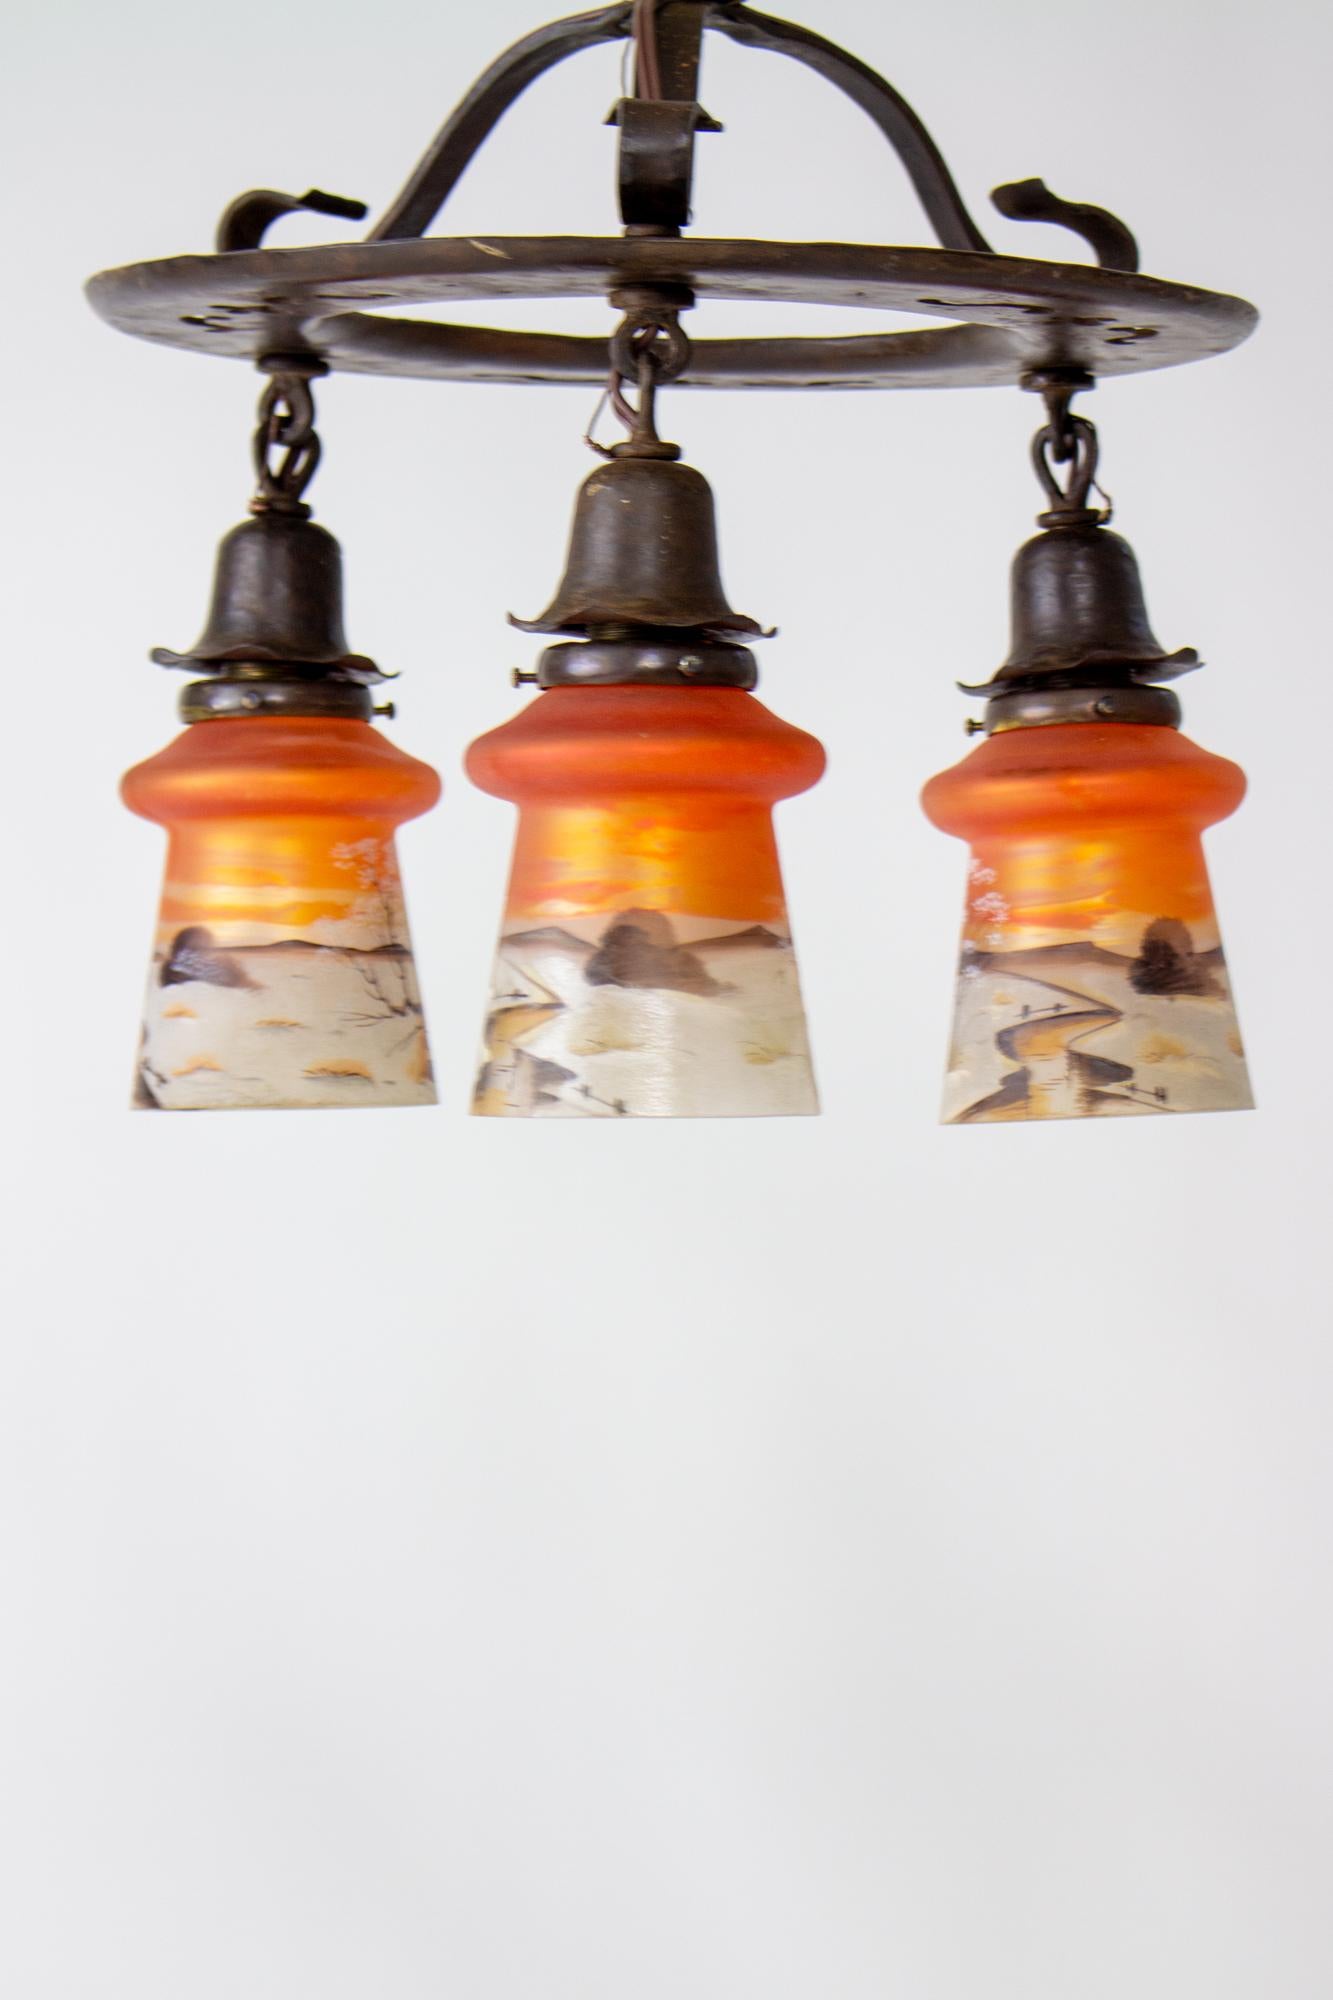 Early 20th century arts and crafts chandelier with orange painted glass. Wrought iron and brass fixture with three down hanging lights. The glass is orange with a hand painted scene. Iron has been cleaned and waxed, rewired, and glass in very good